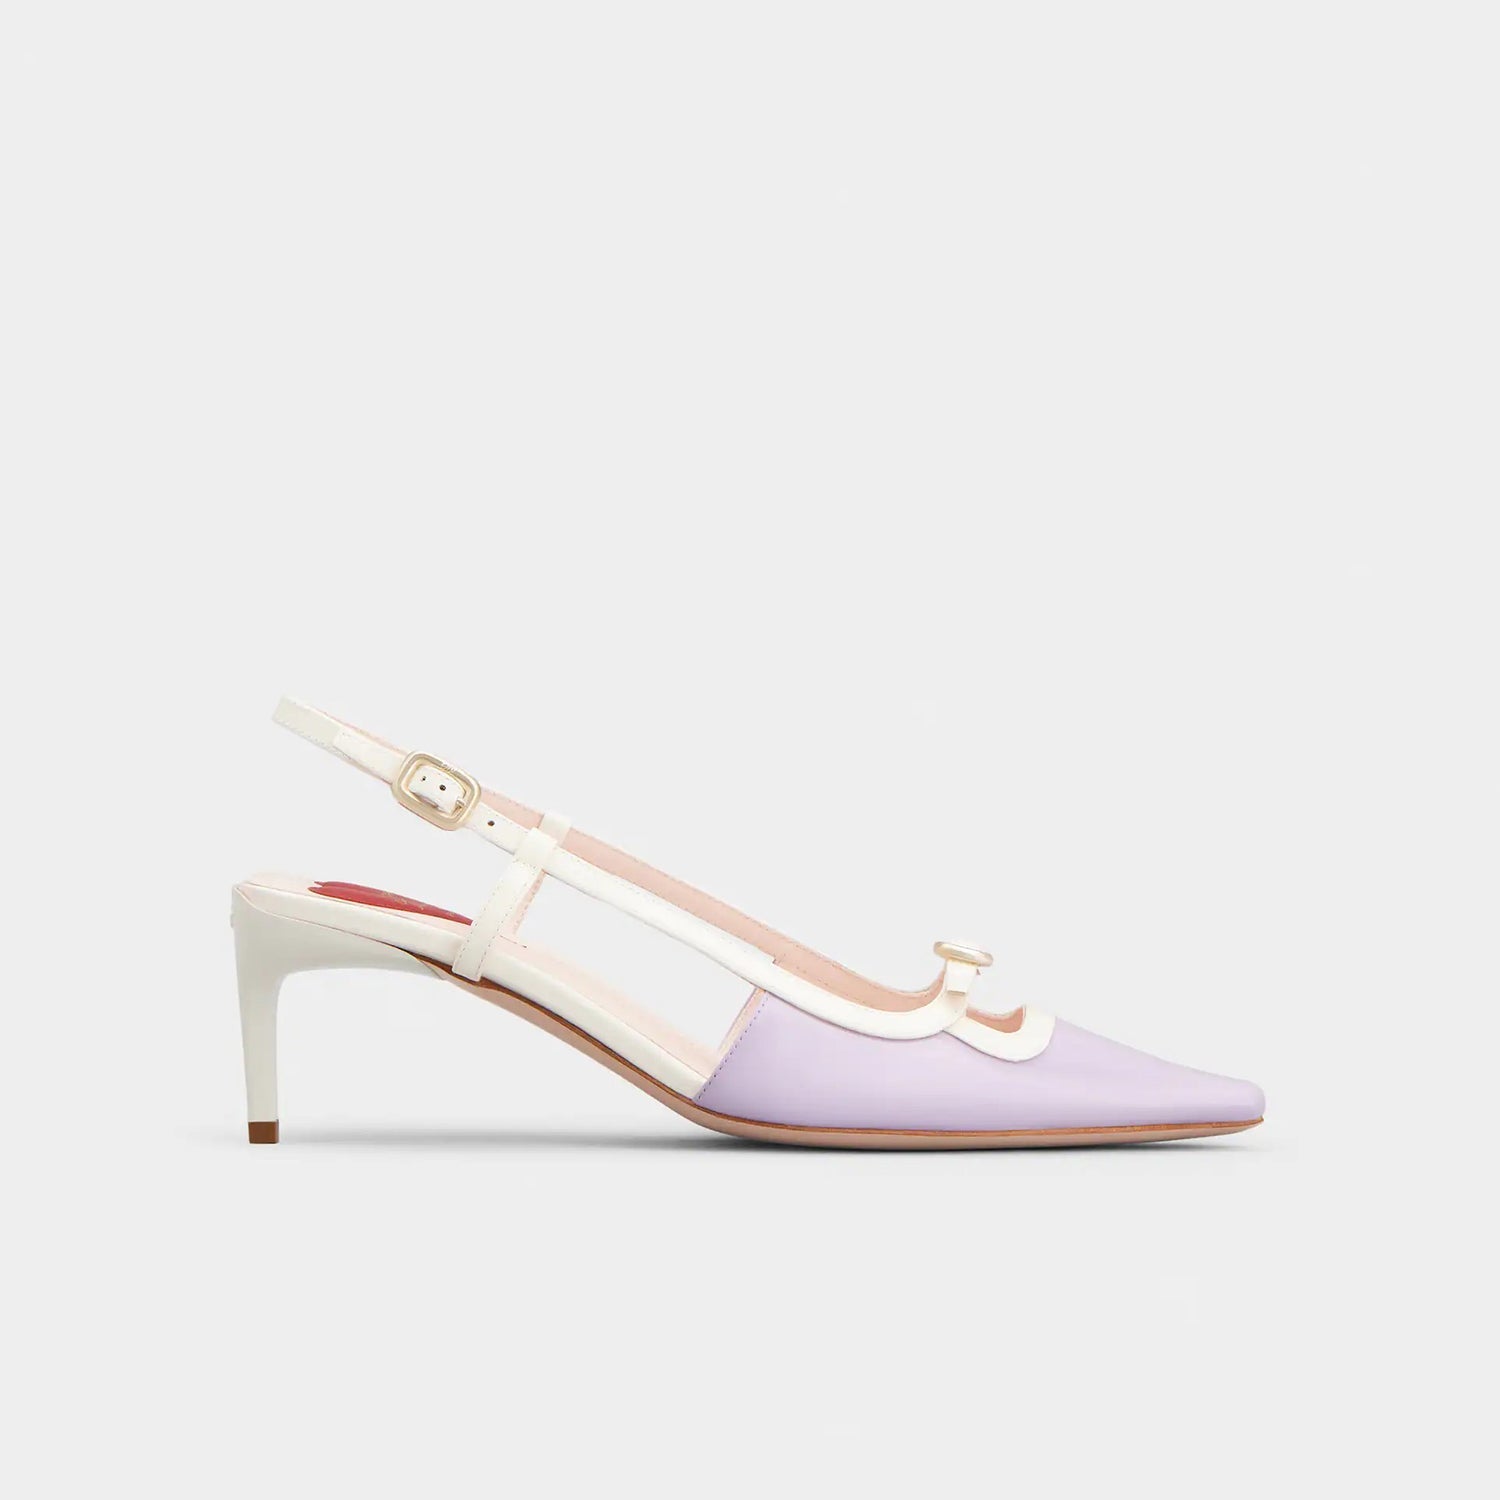 Viv’ Canard Slingback Pumps in Patent Leather